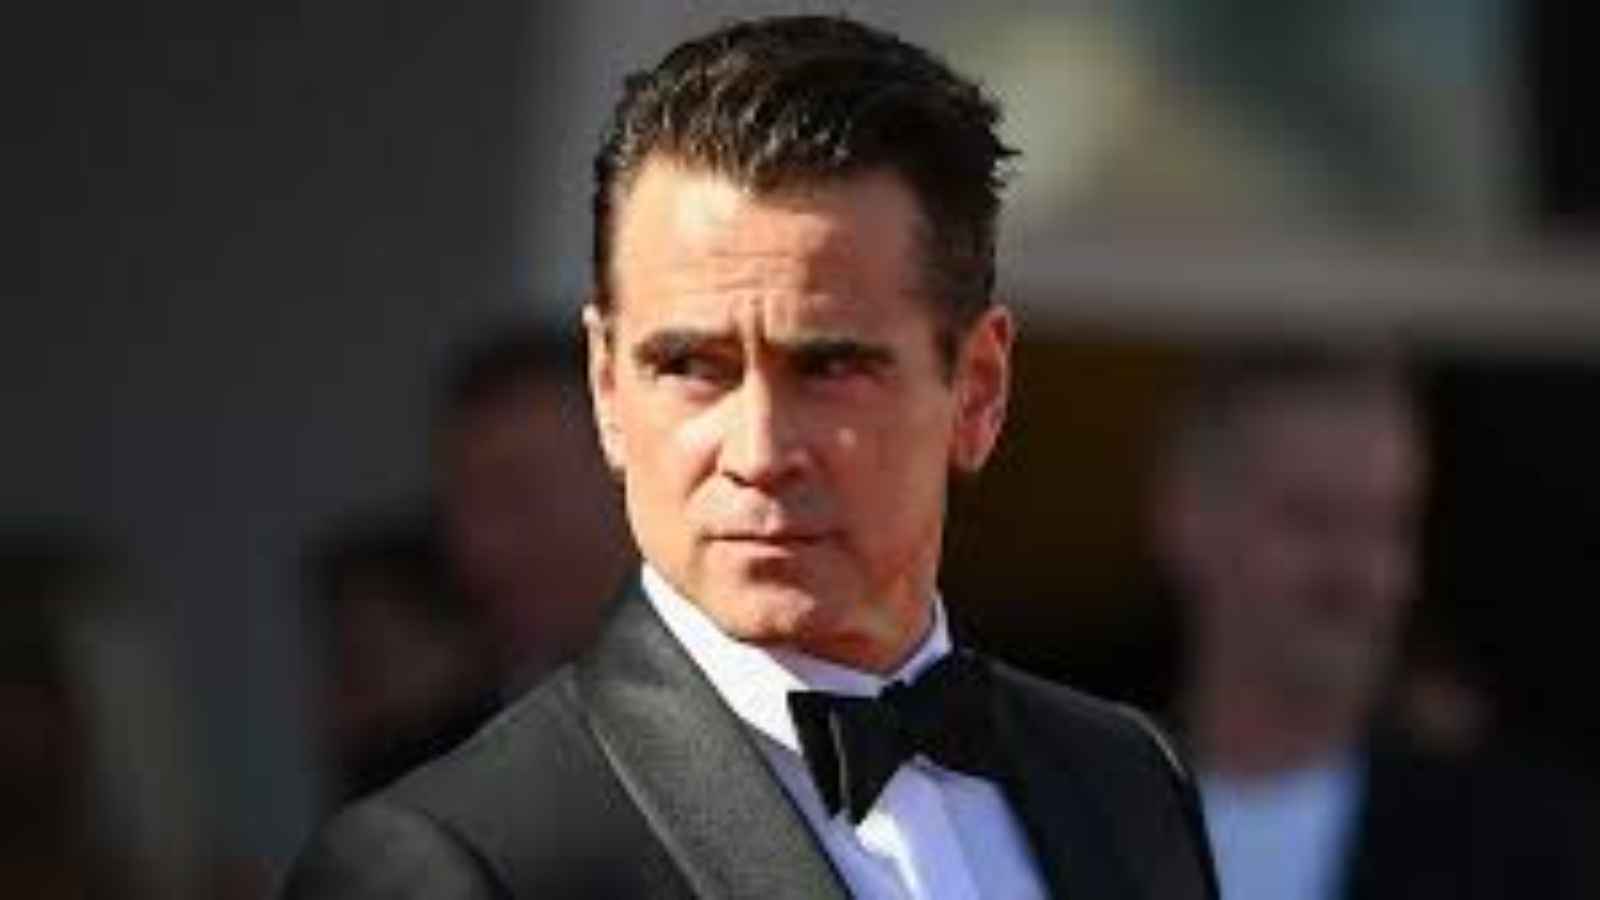 Colin Farrell Biography: Age, Height, Movies, TV Shows, Girlfriend, Net Worth